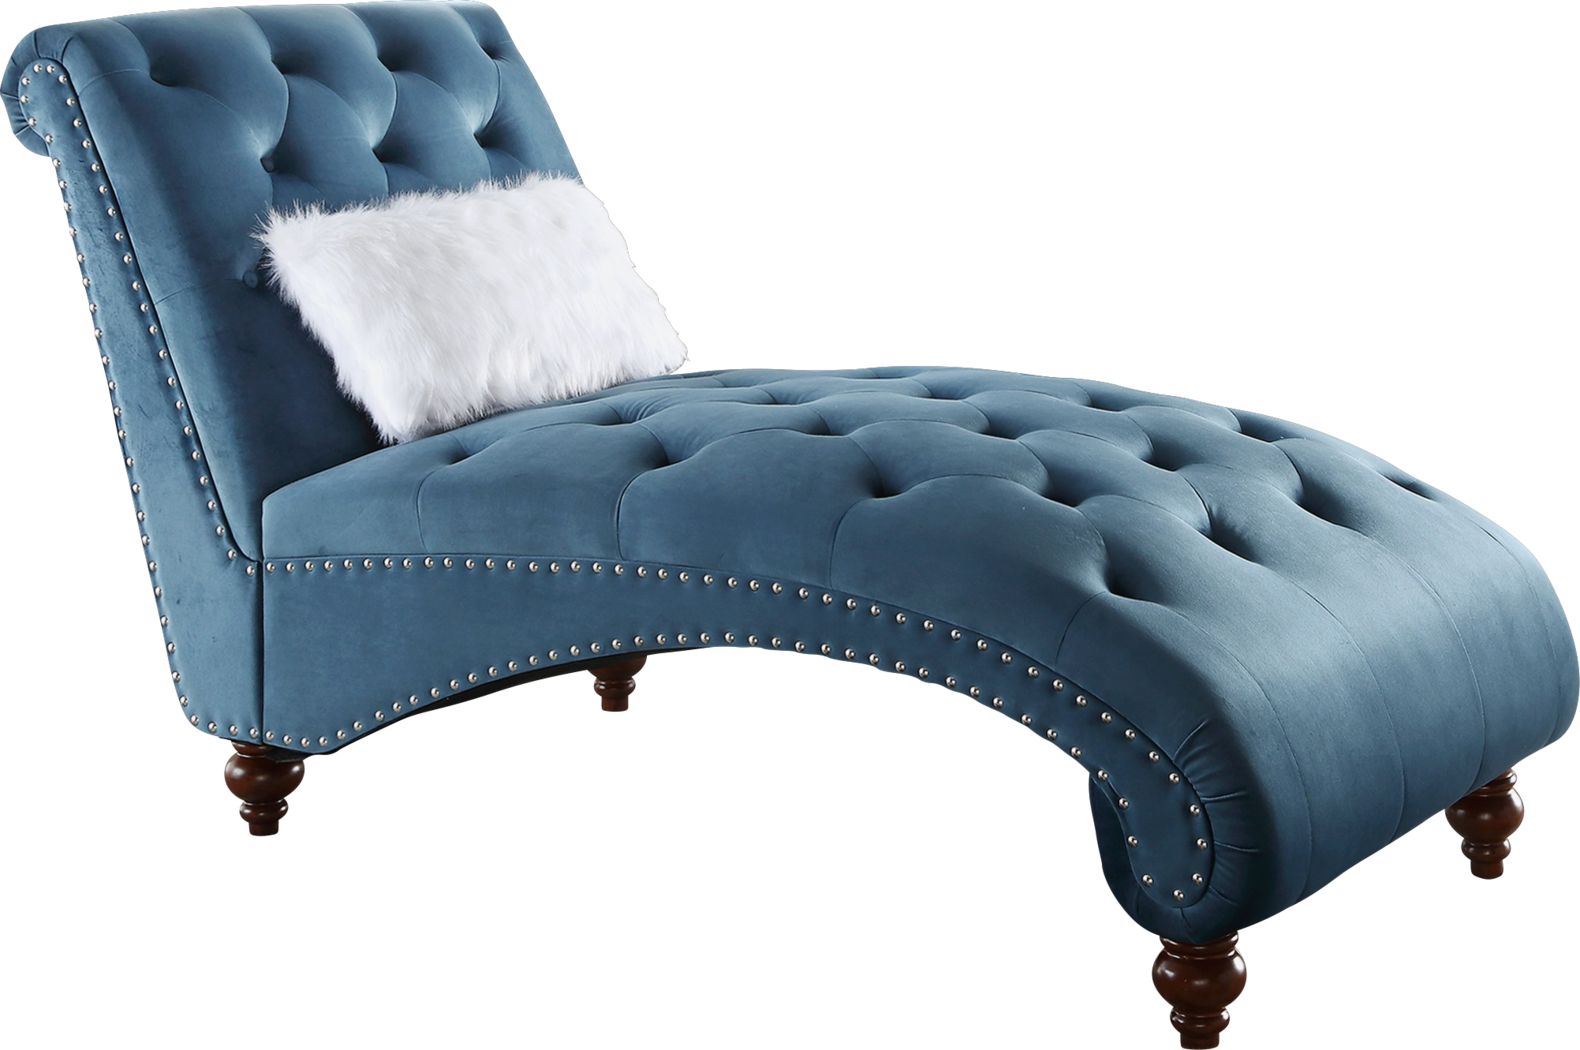 Meuse Blue Lounge Chaise - Rooms To Go